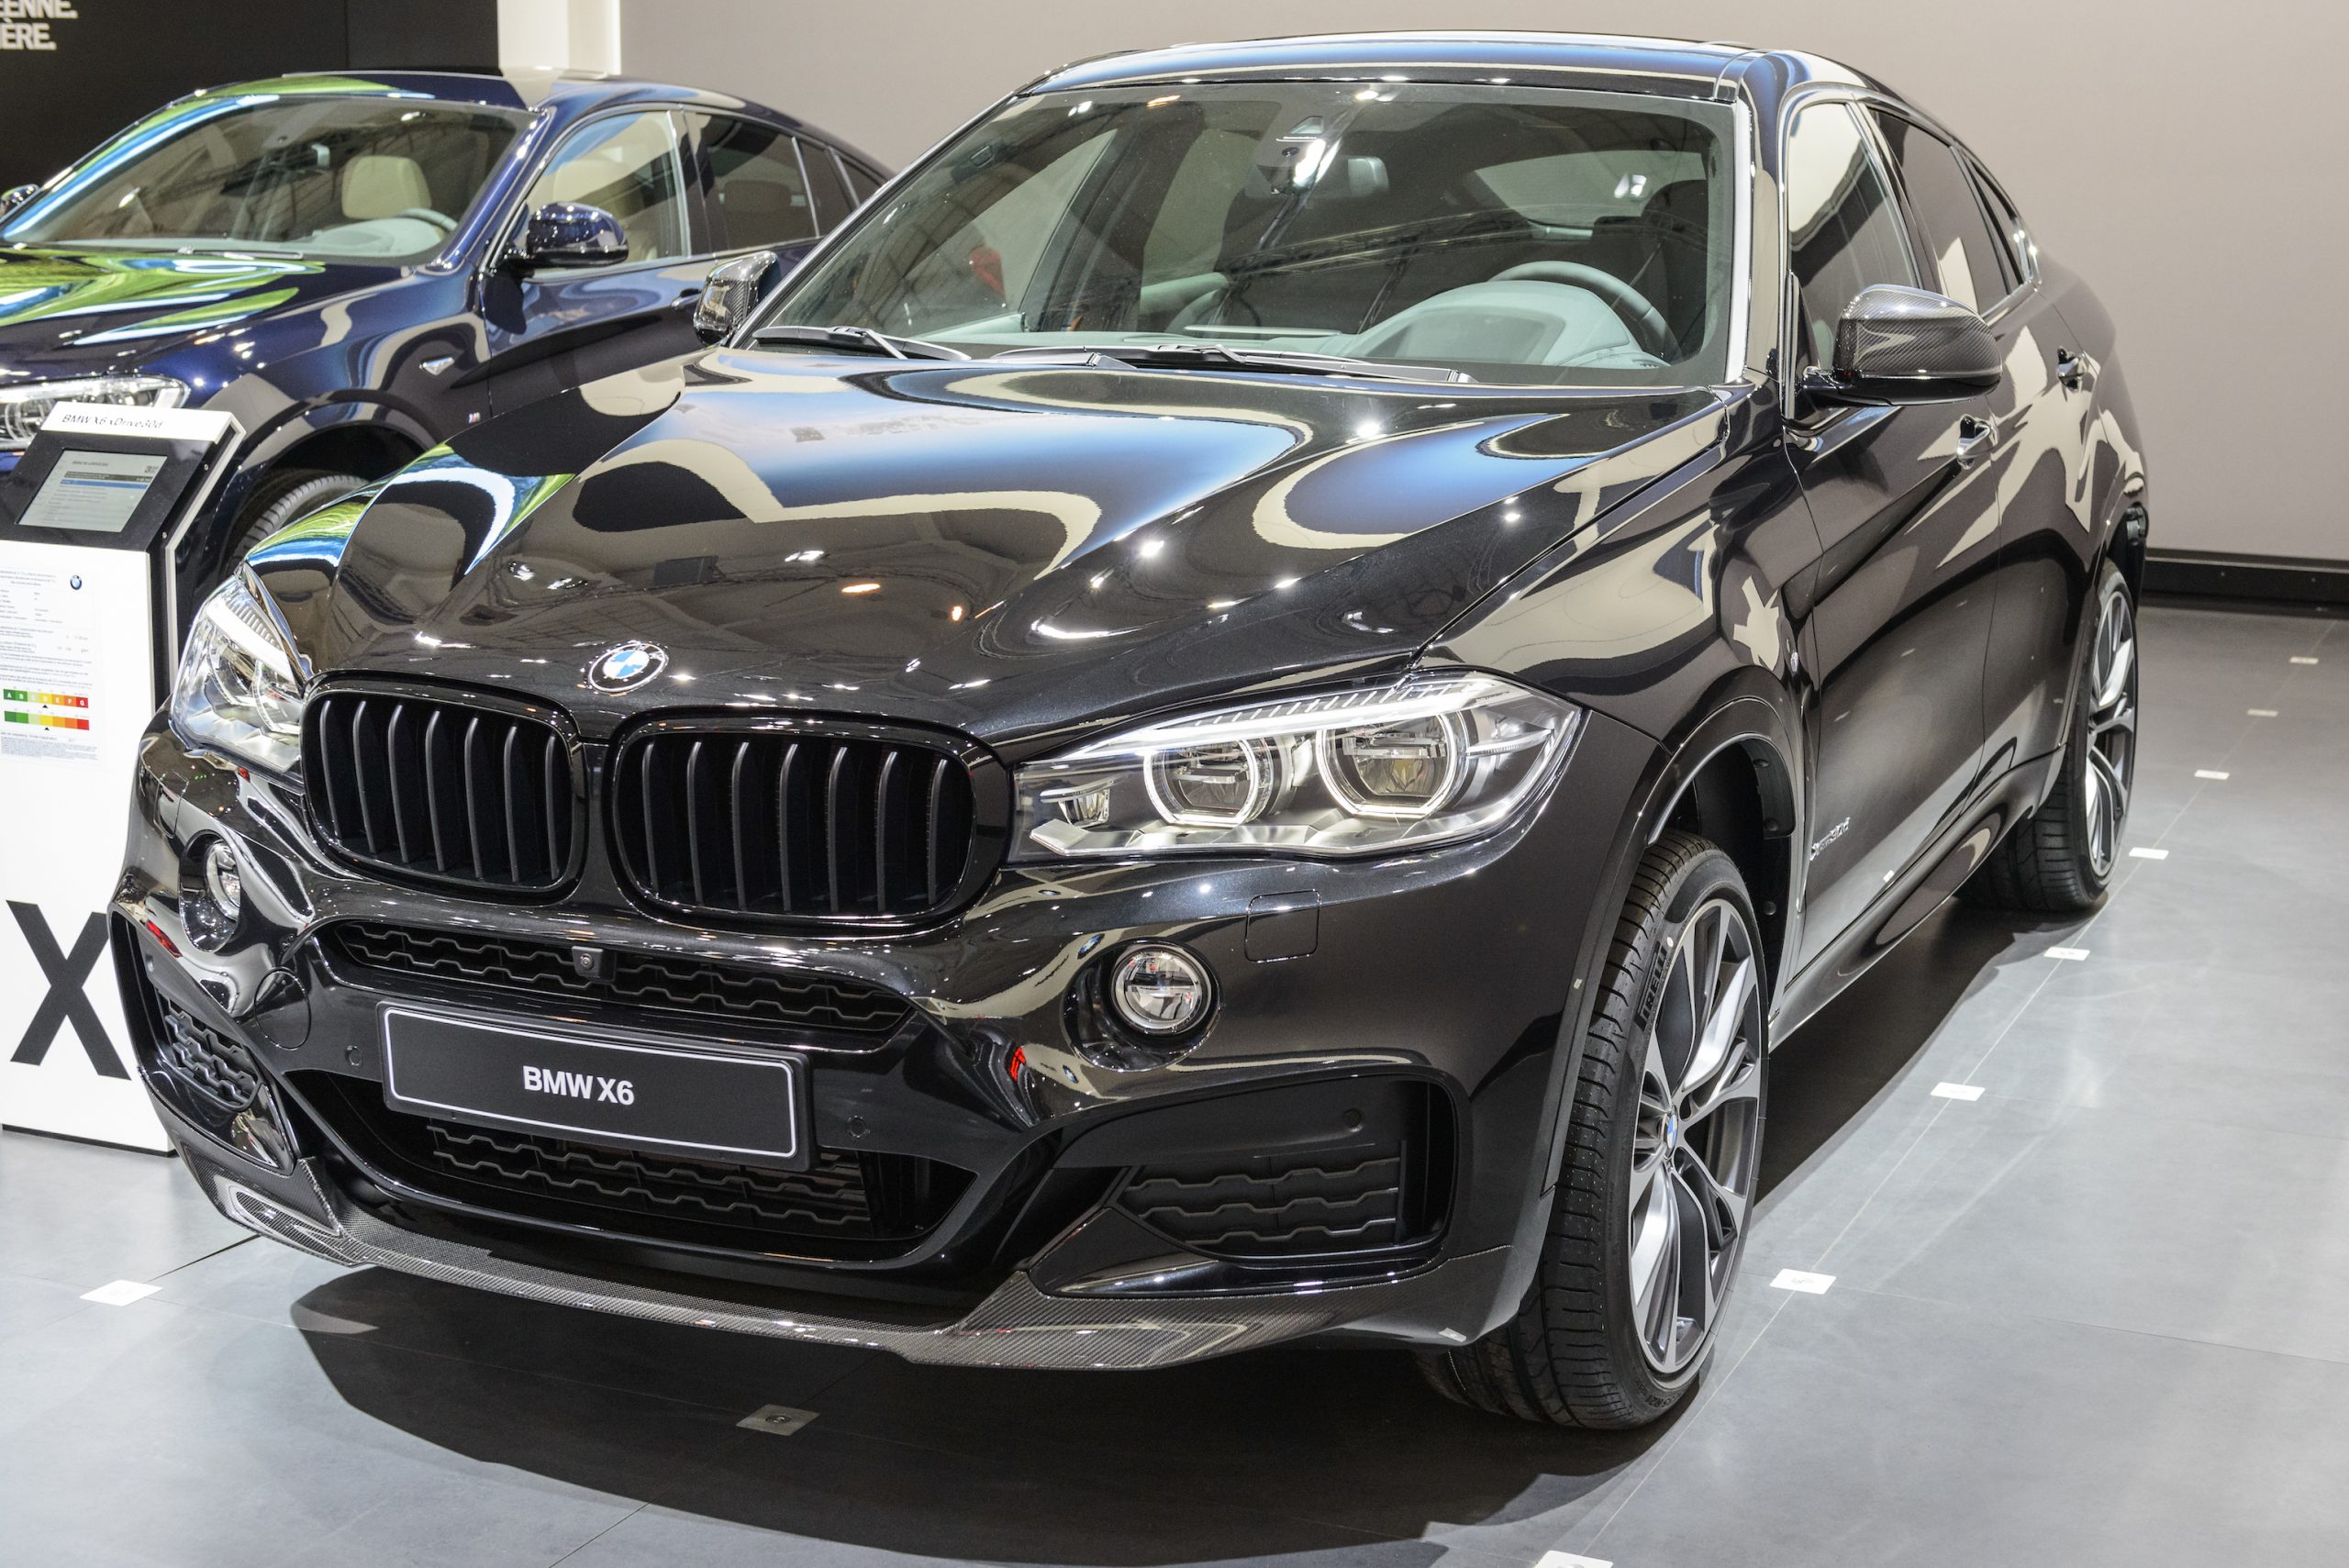 Black BMW X6 performance luxury crossover SUV on display at Brussels Expo on January 13, 2017 in Brussels, Belgium